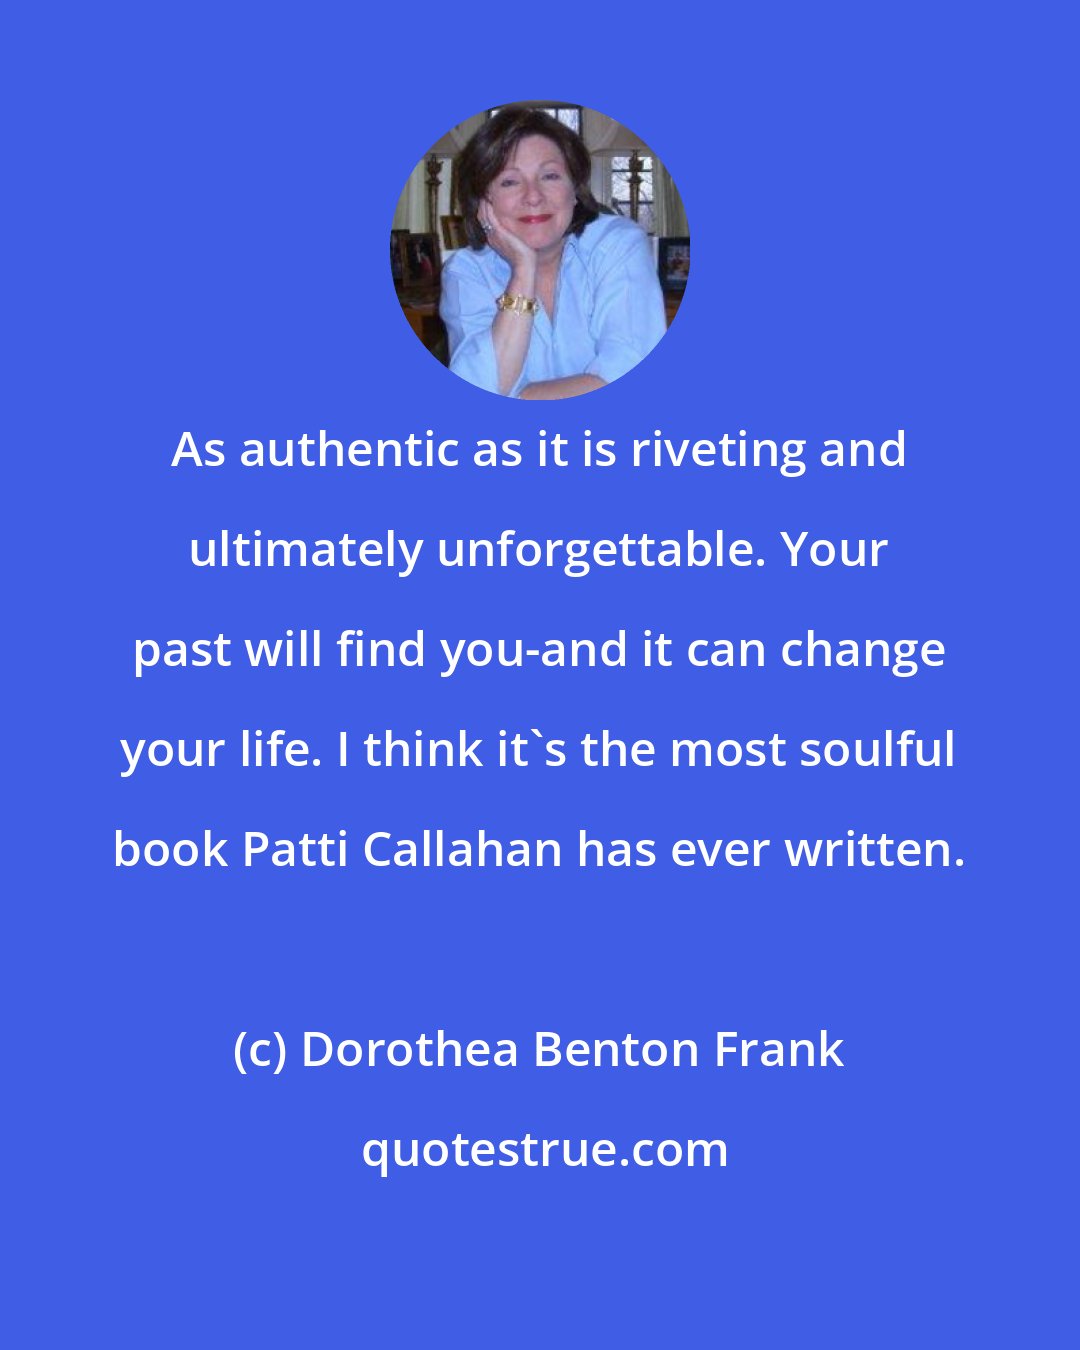 Dorothea Benton Frank: As authentic as it is riveting and ultimately unforgettable. Your past will find you-and it can change your life. I think it's the most soulful book Patti Callahan has ever written.